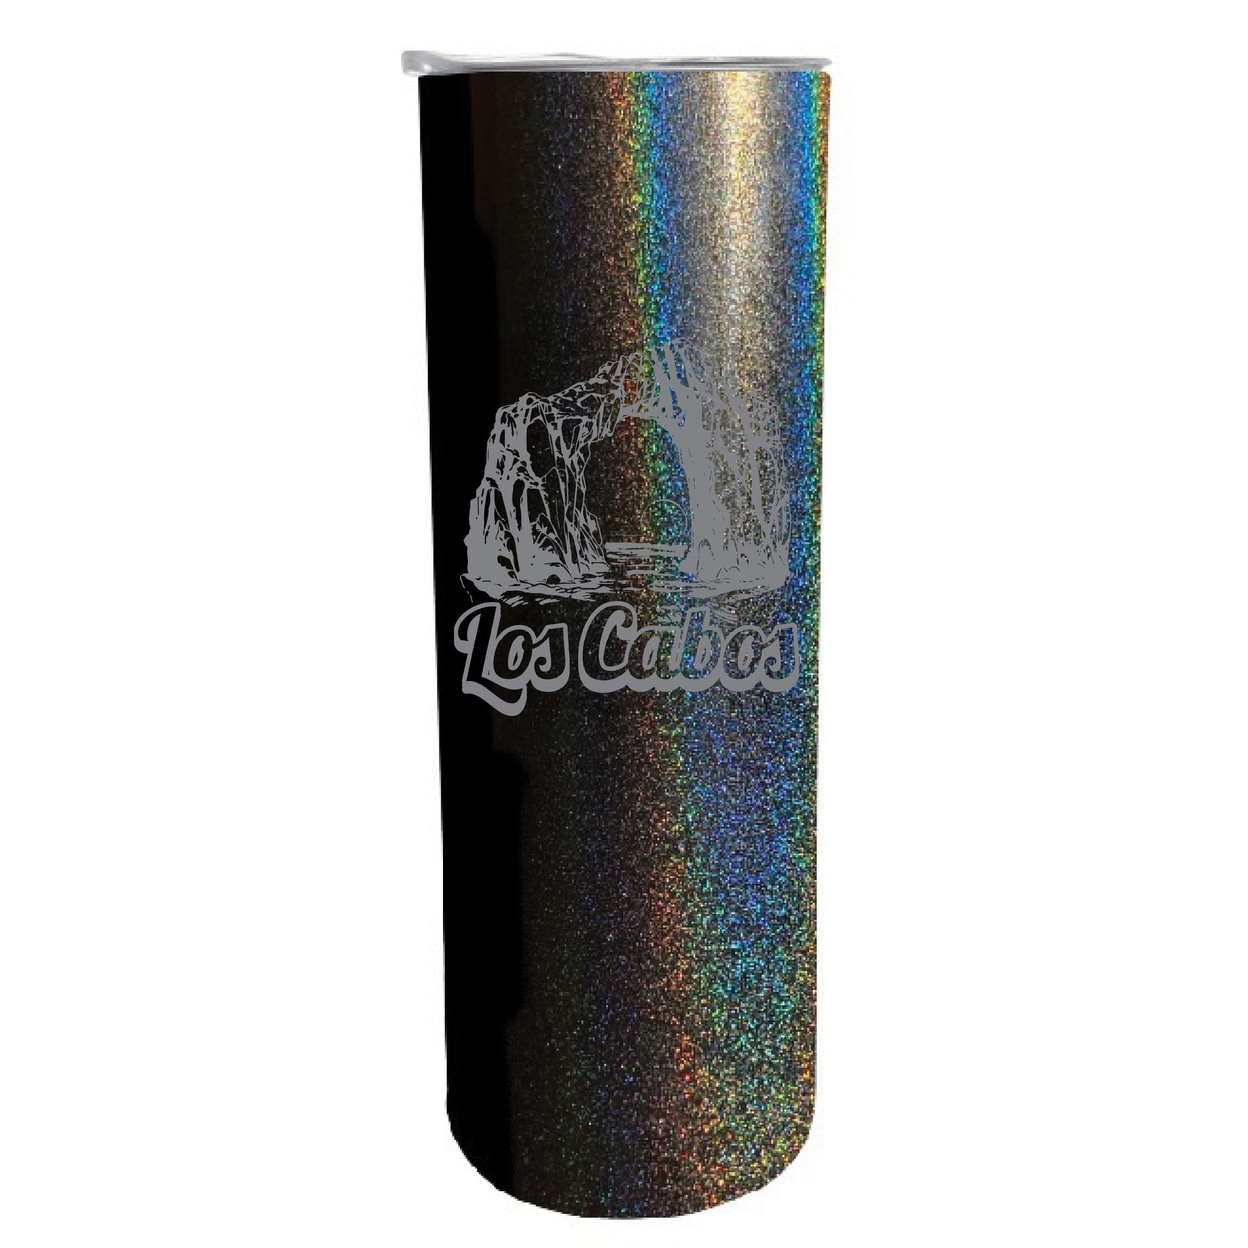 Los Cabos Mexico Souvenir 20 Oz Engraved Insulated Stainless Steel Skinny Tumbler - Black Glitter,,2-Pack